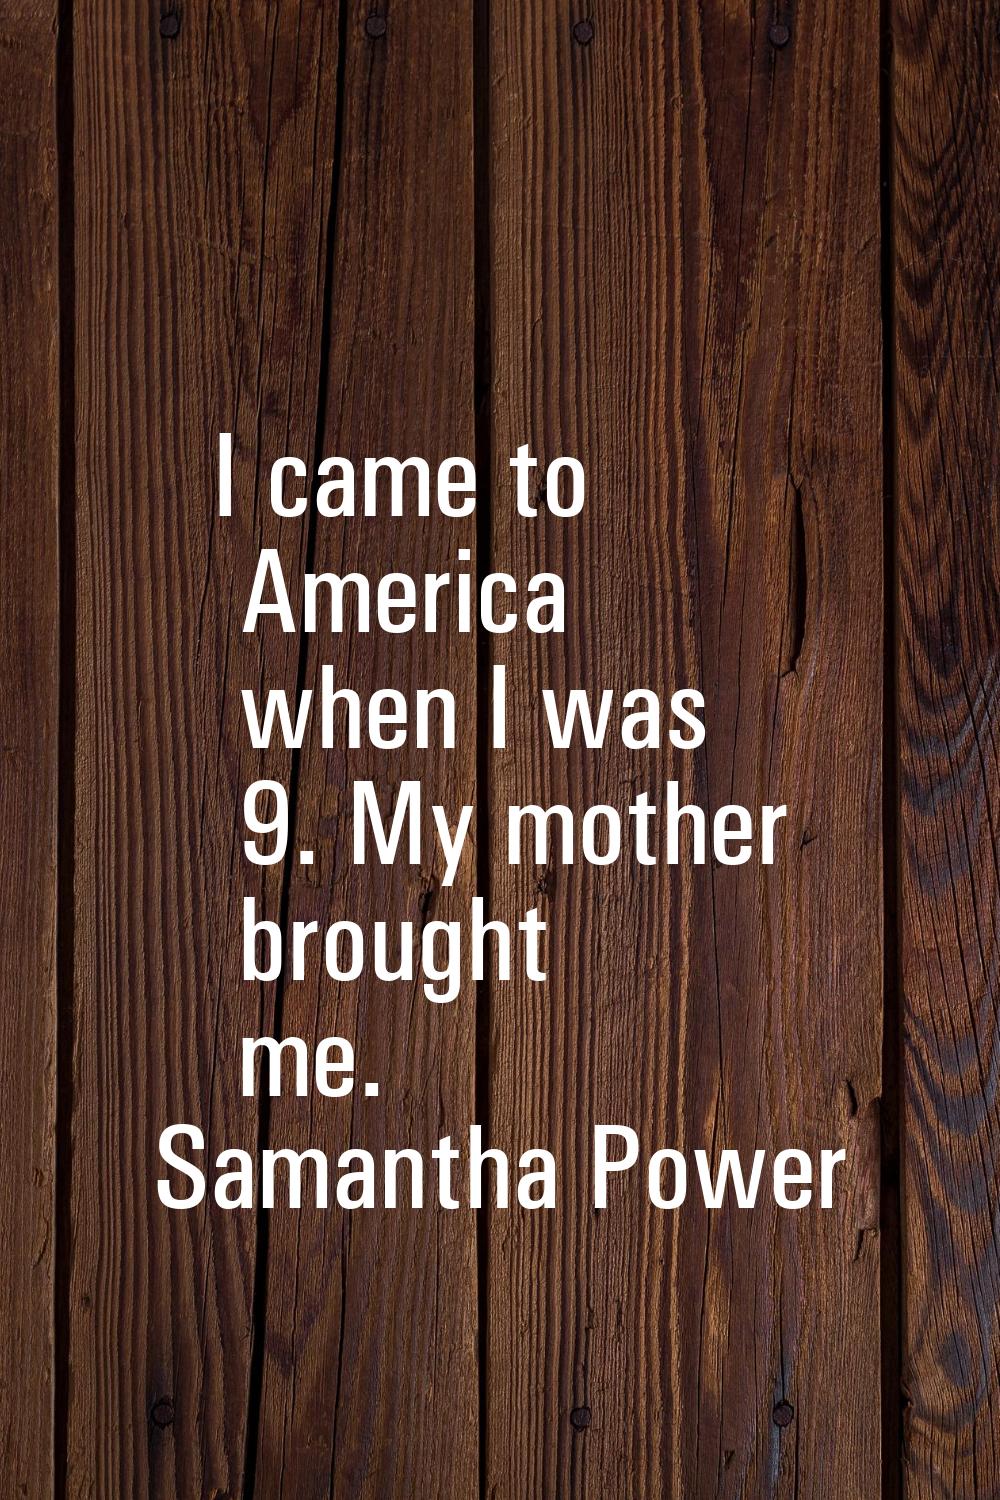 I came to America when I was 9. My mother brought me.